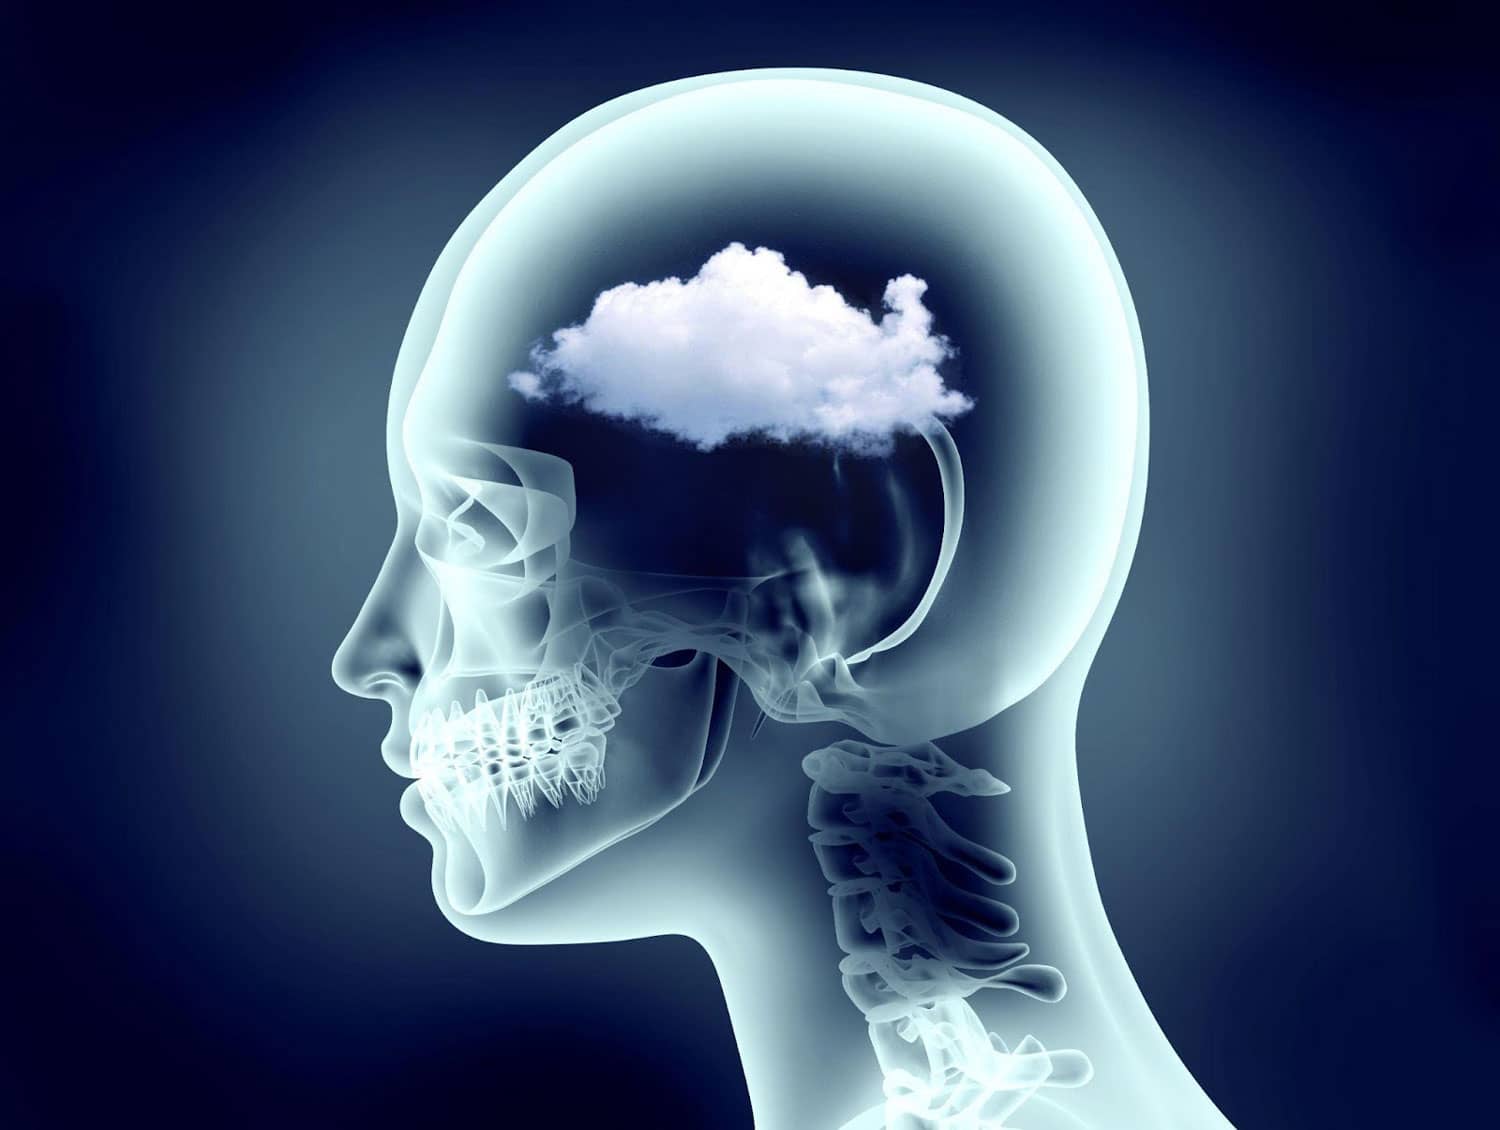 An artists rendition of an X-ray of the human head in profile. A cloud hovers in the brain to symbolize brain fog.